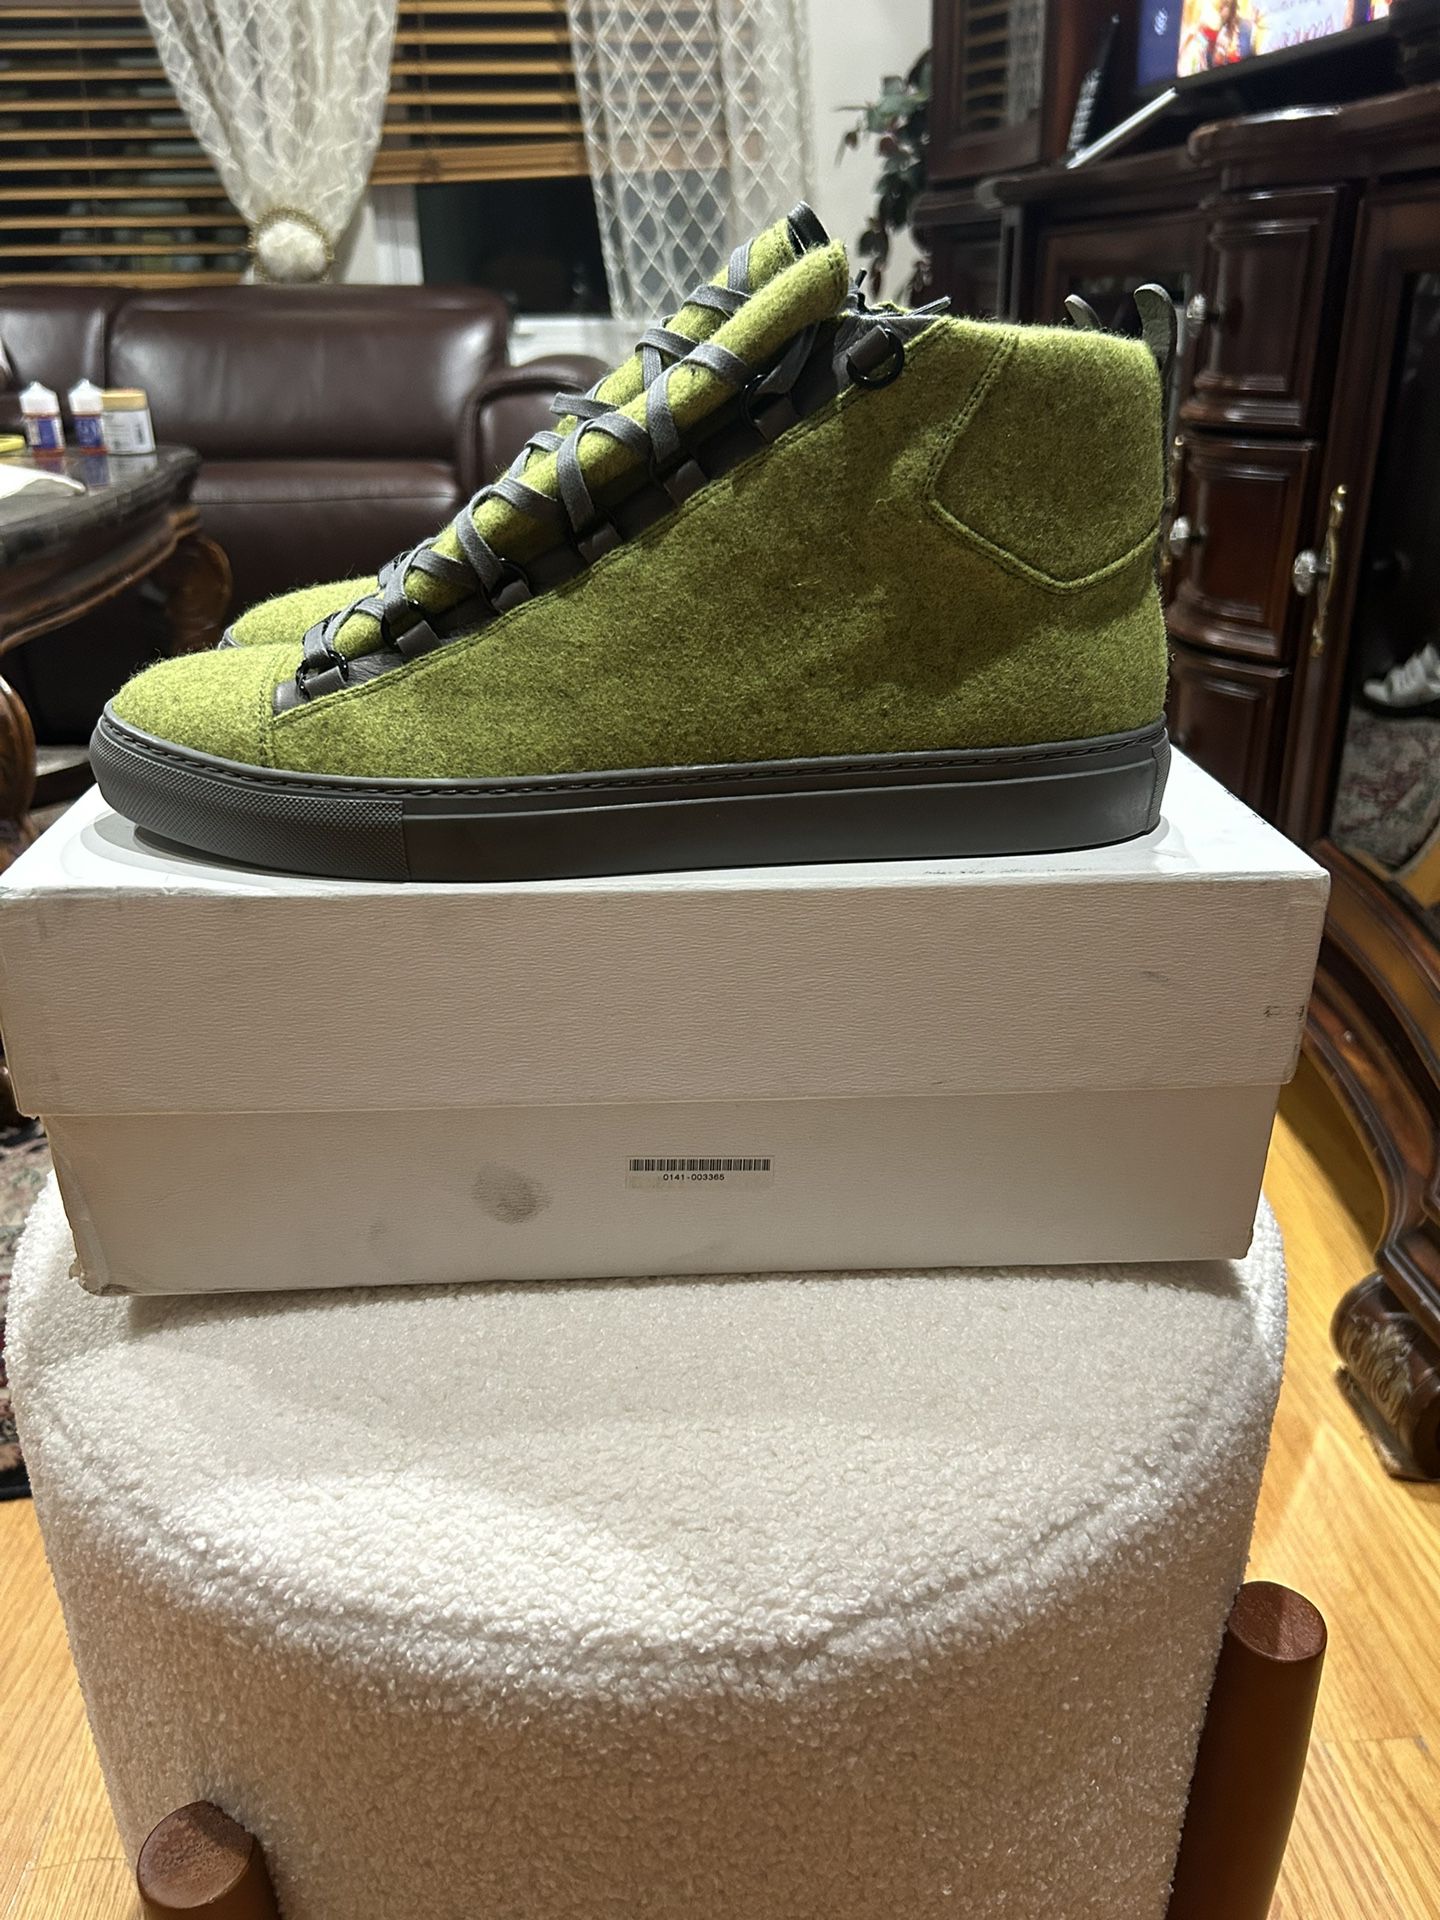 Mens Balenciaga Arena “Size 45E” 11 US for Sale in East Meadow, -